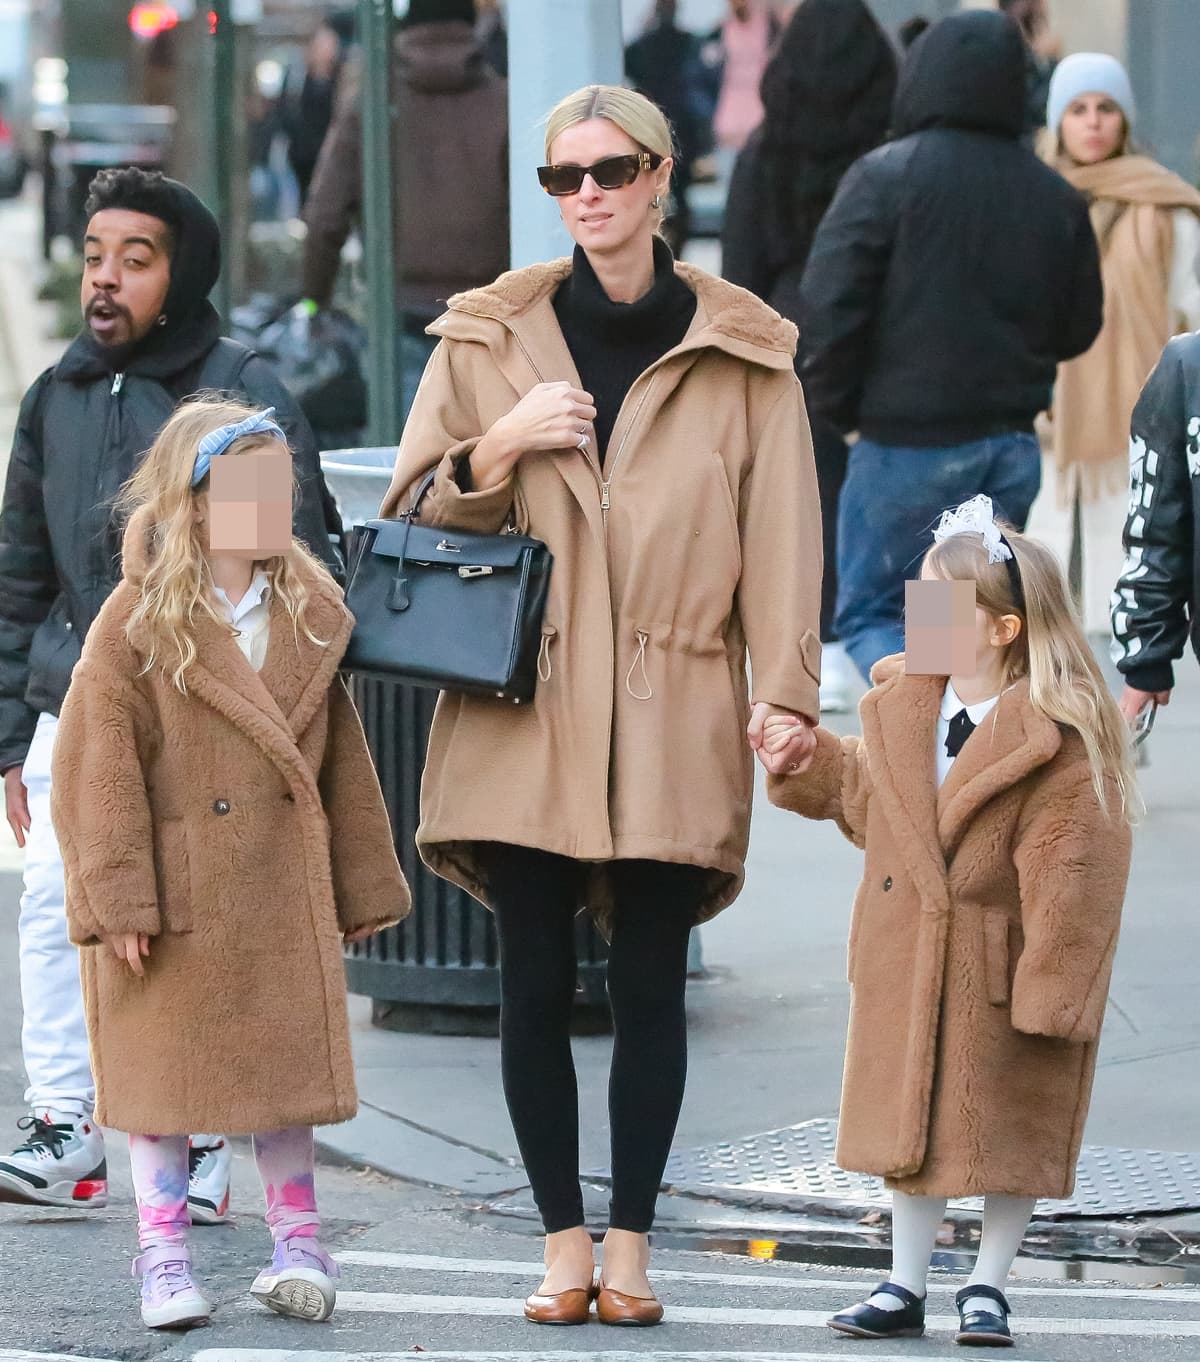 Nicky Hilton Rothschild, epitomizing urban elegance, walks through New York City with her daughters, Lily and Teddy, on December 12, 2023